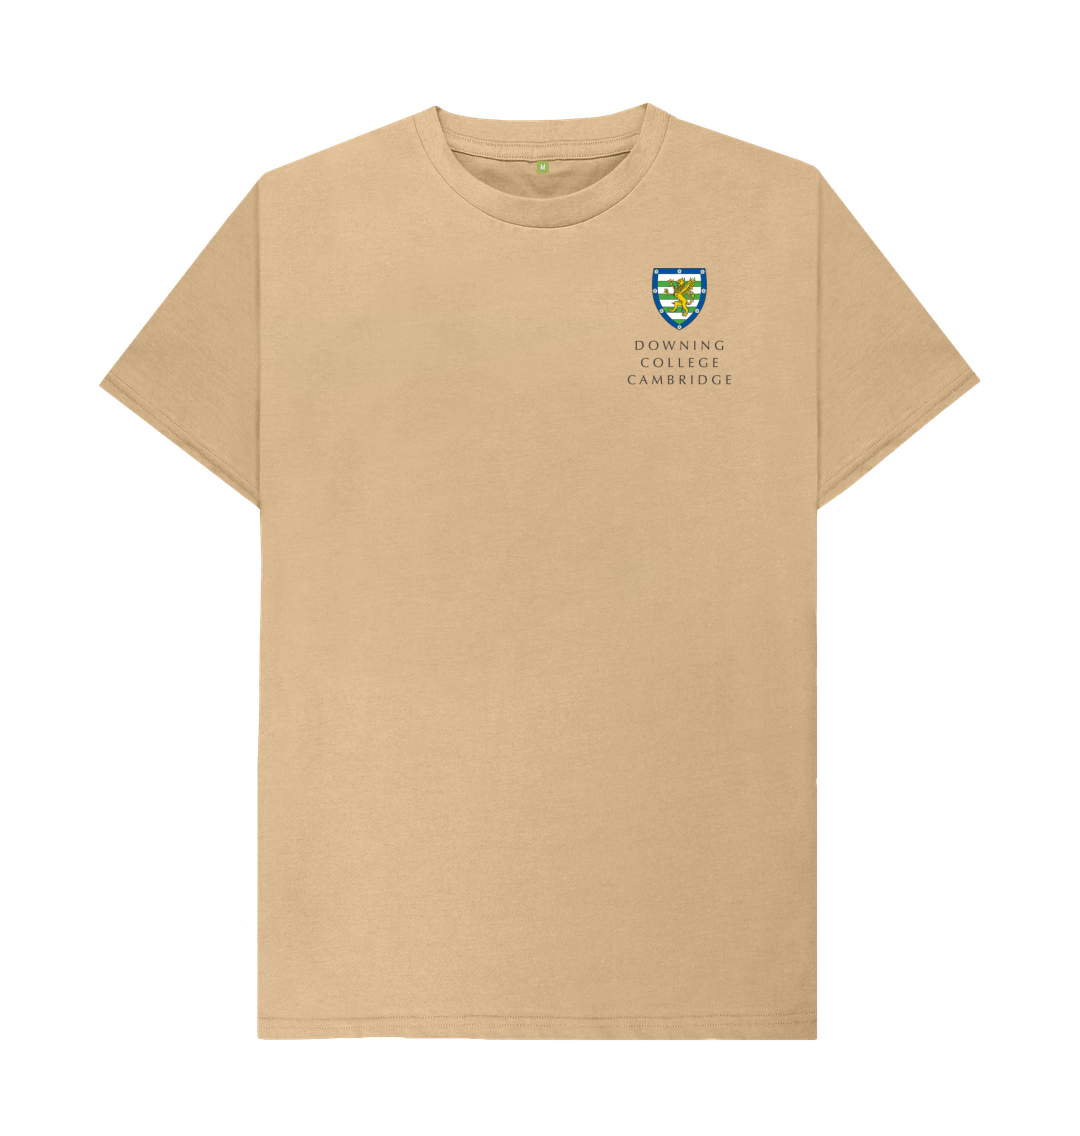 Sand Downing College Crew neck tee - light colours